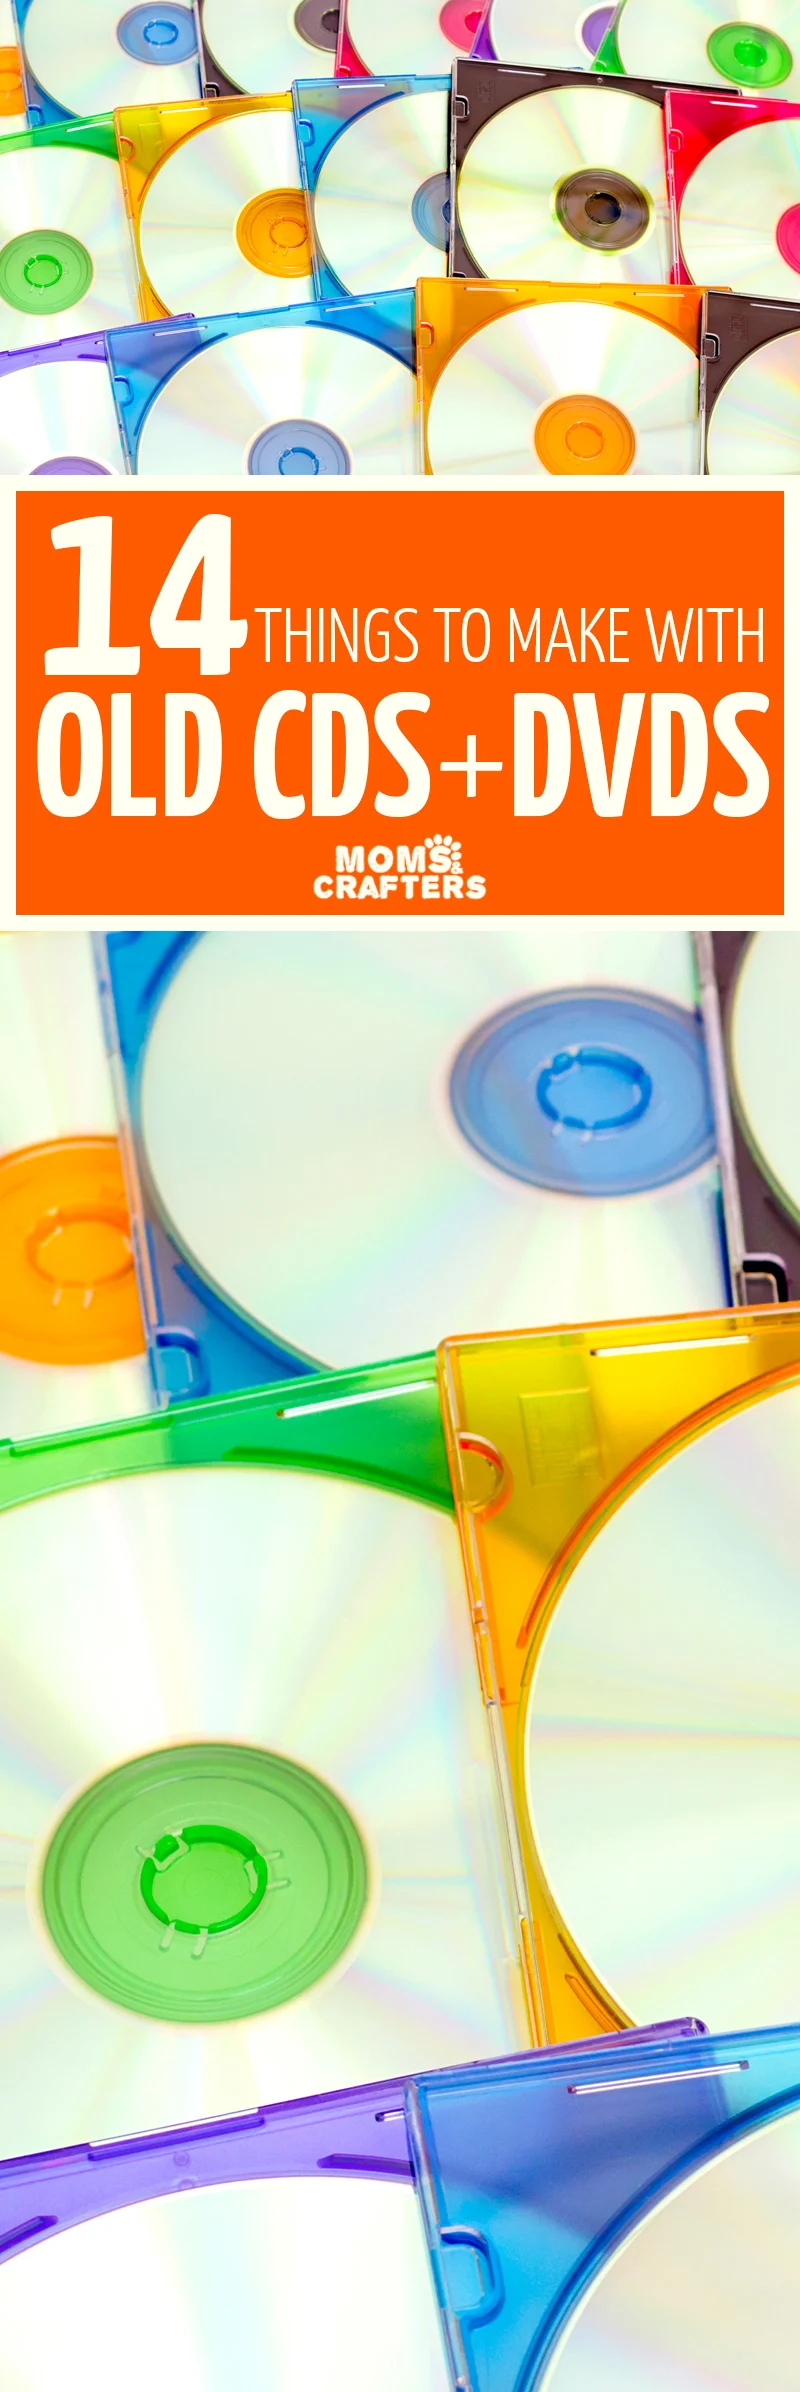 IF you're looking for cool ways to upcycle old cds and dvds you'll love these things to do with cds and dvds! These cool things to make with old cds include easy DVD and CD crafts for kids, adults, and teens too! #cdcrafts #upcycle #recycle #easycrafts #dvdcrafts #recycledcraft